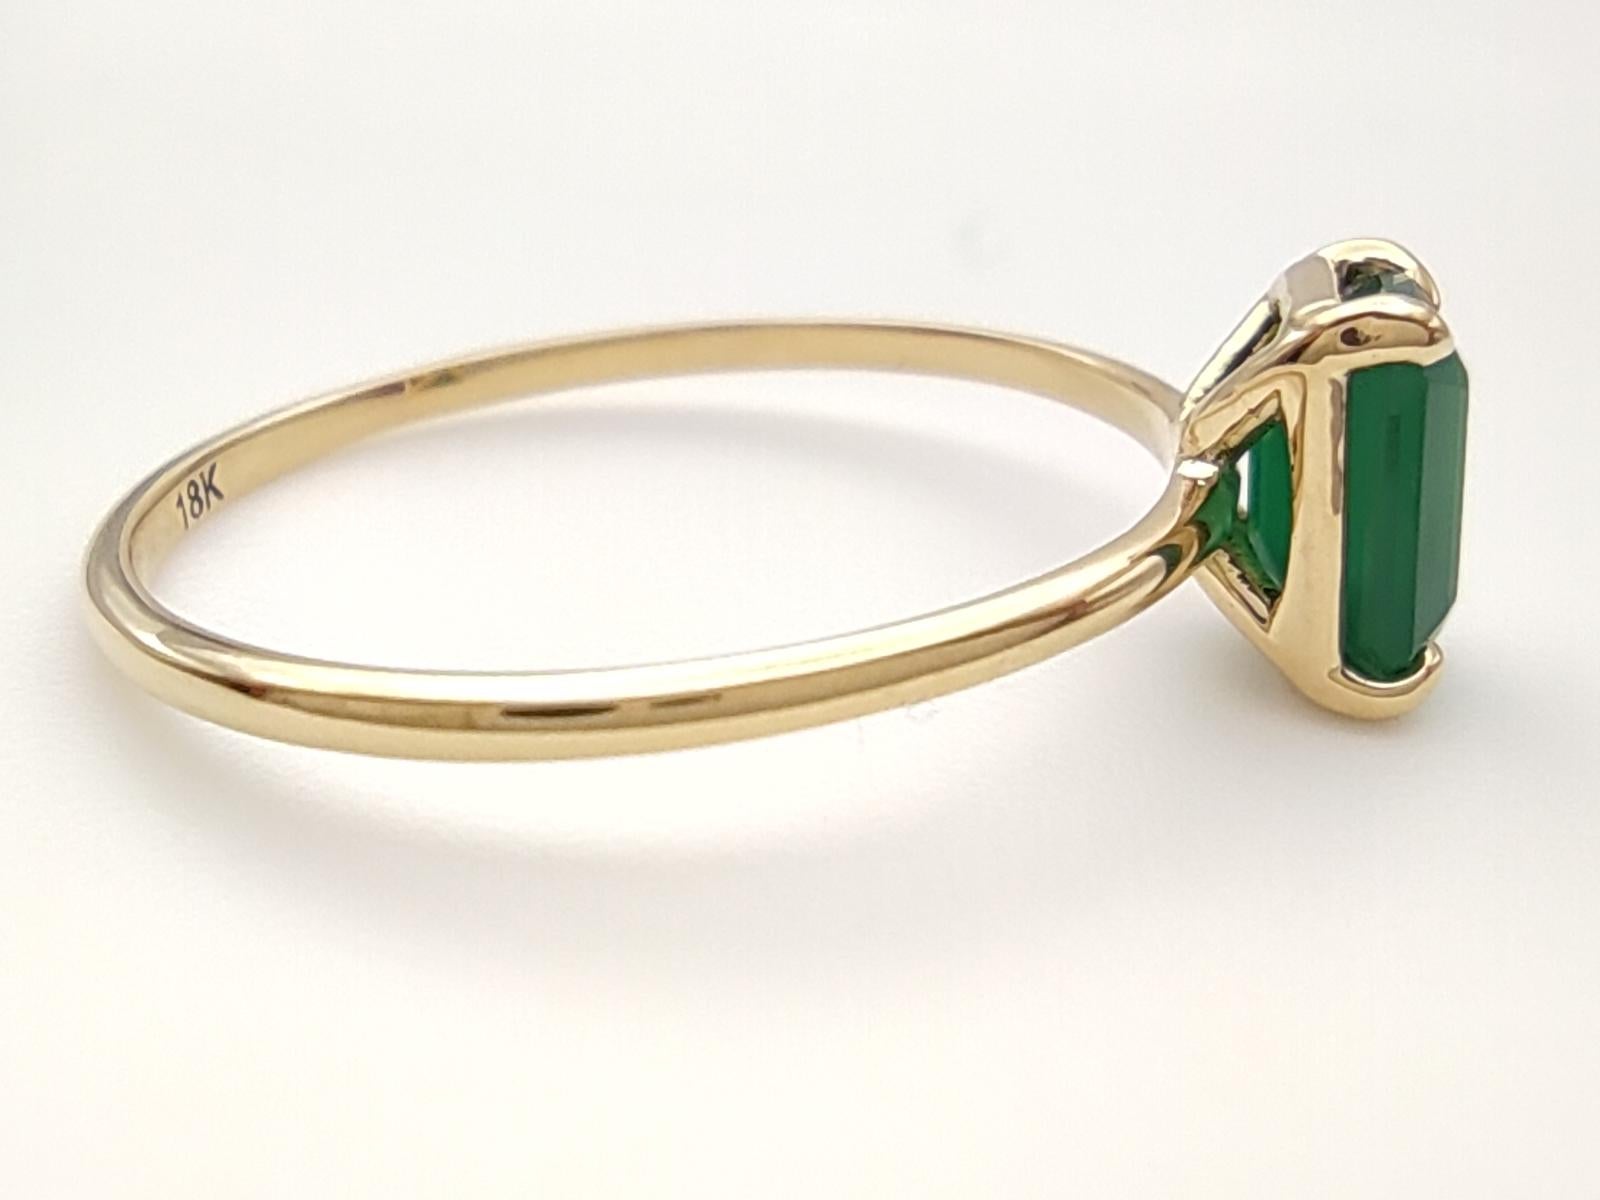 0.56ct Emerald in 18K Gold Minimalist Everyday Ring for Elegance and Versatility For Sale 2